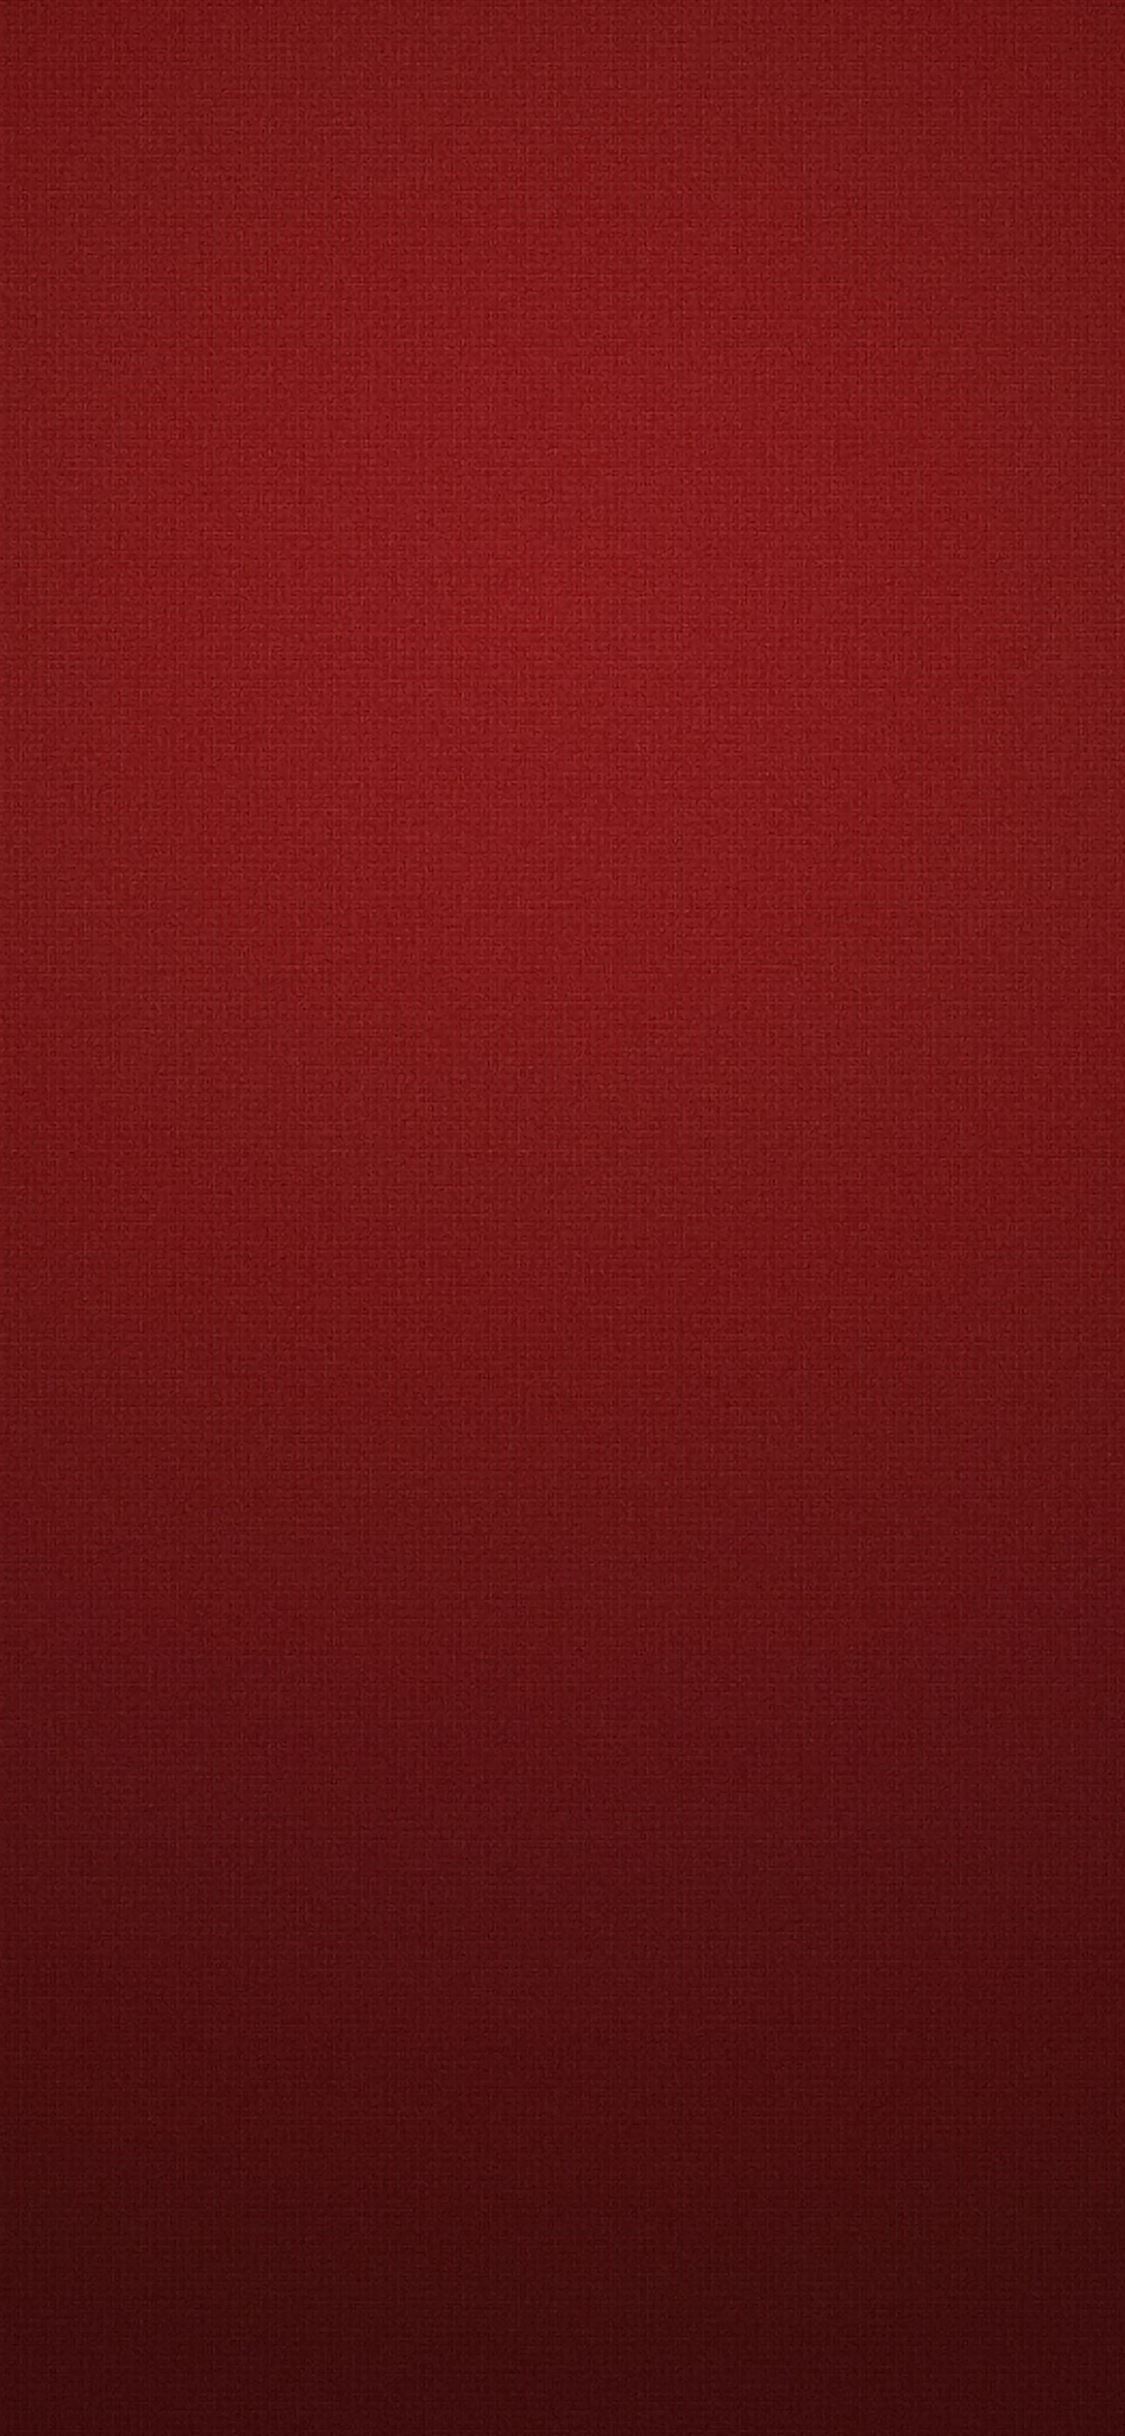 Red Small plaid background iPhone wallpaper 